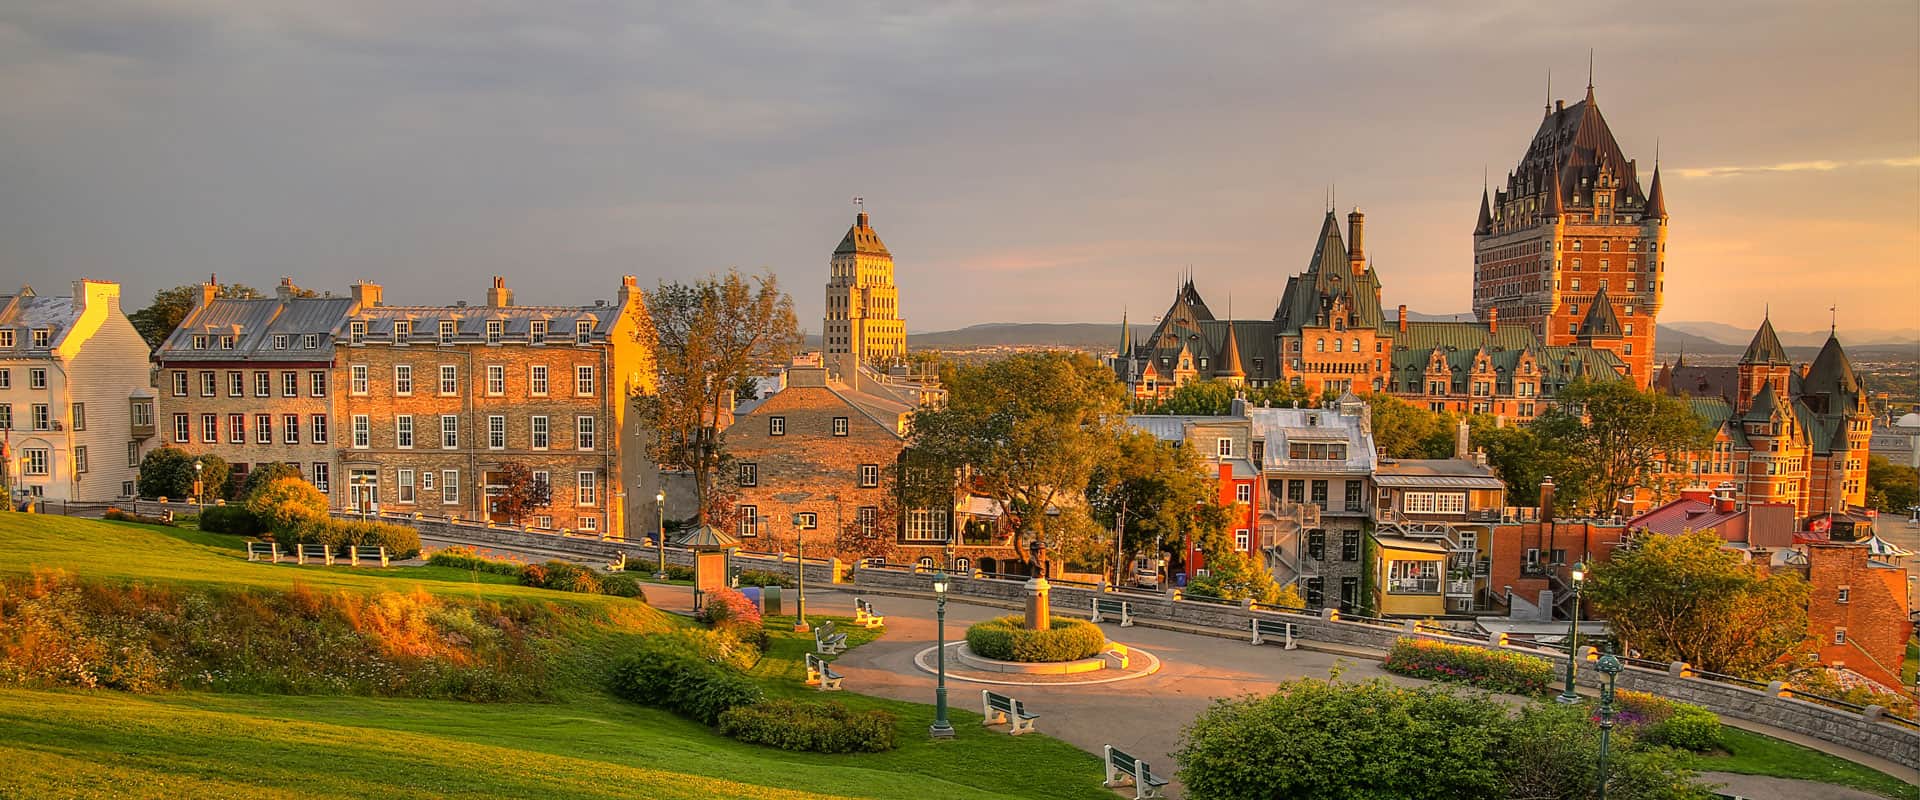 Photo Of Old Quebec